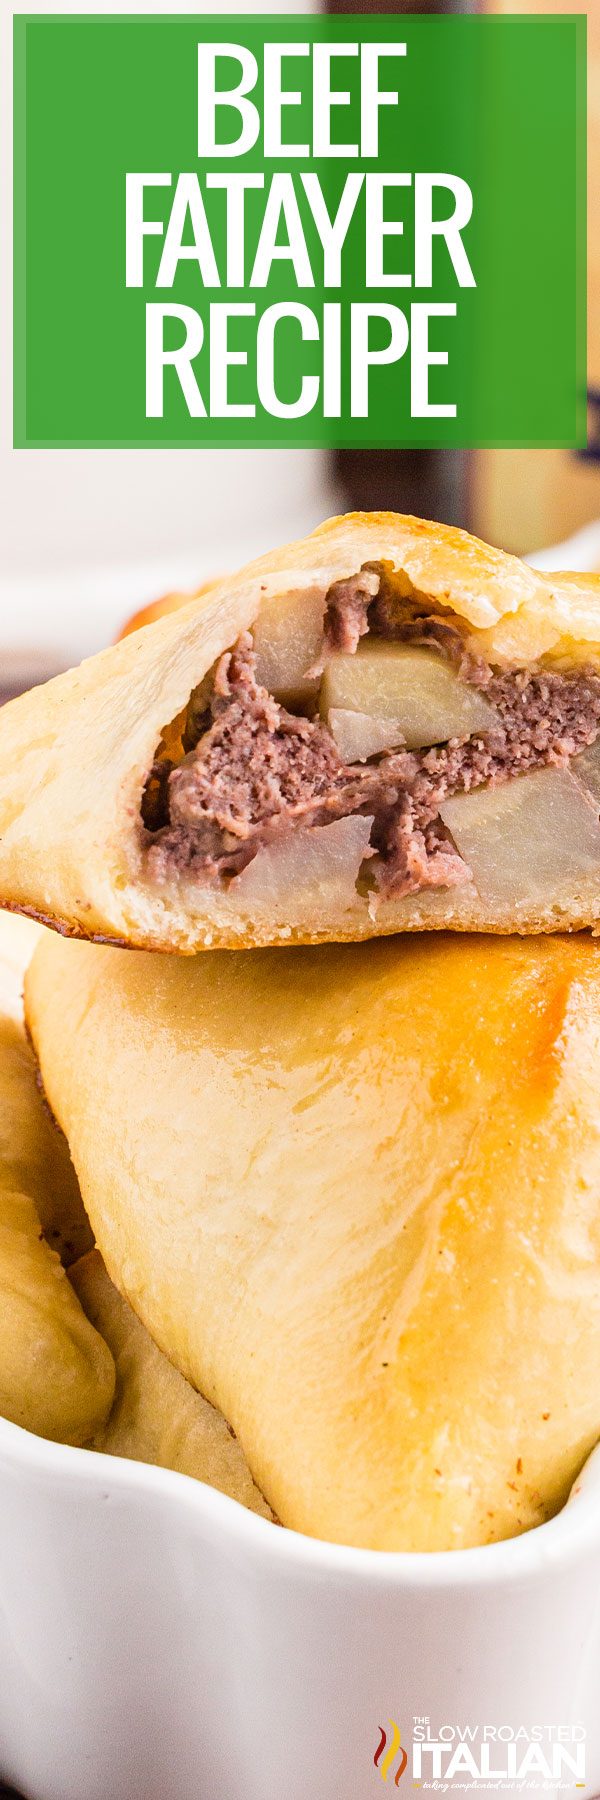 titled image (and shown): beef fatayer recipe